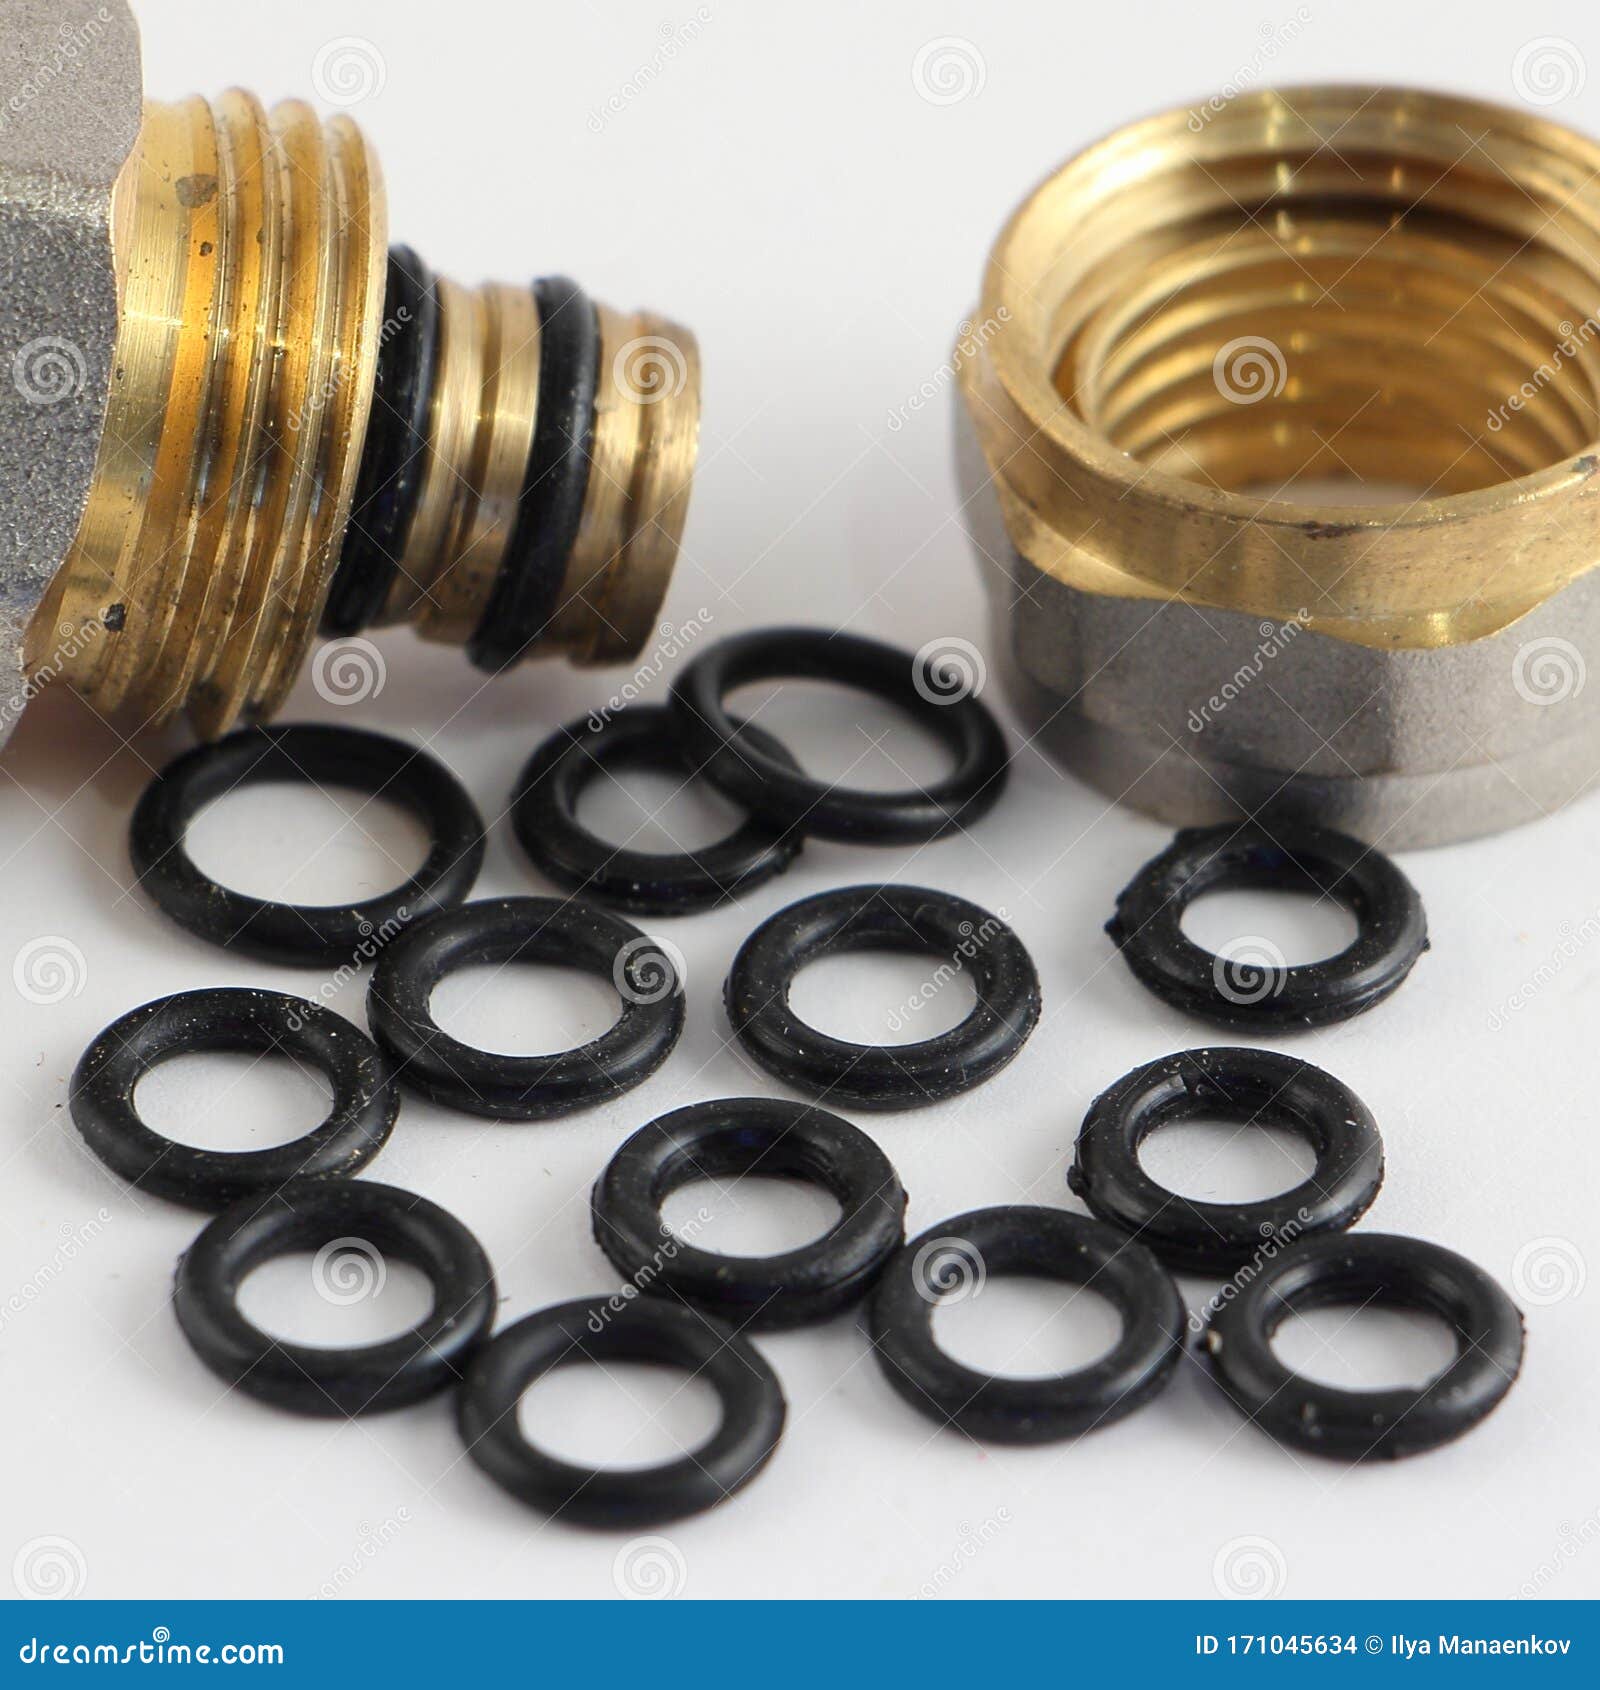 Metal-plastic 16 Mm Fitting Connector with Changeable O-rings Stock Photo -  Image of maintenance, isolated: 171045634